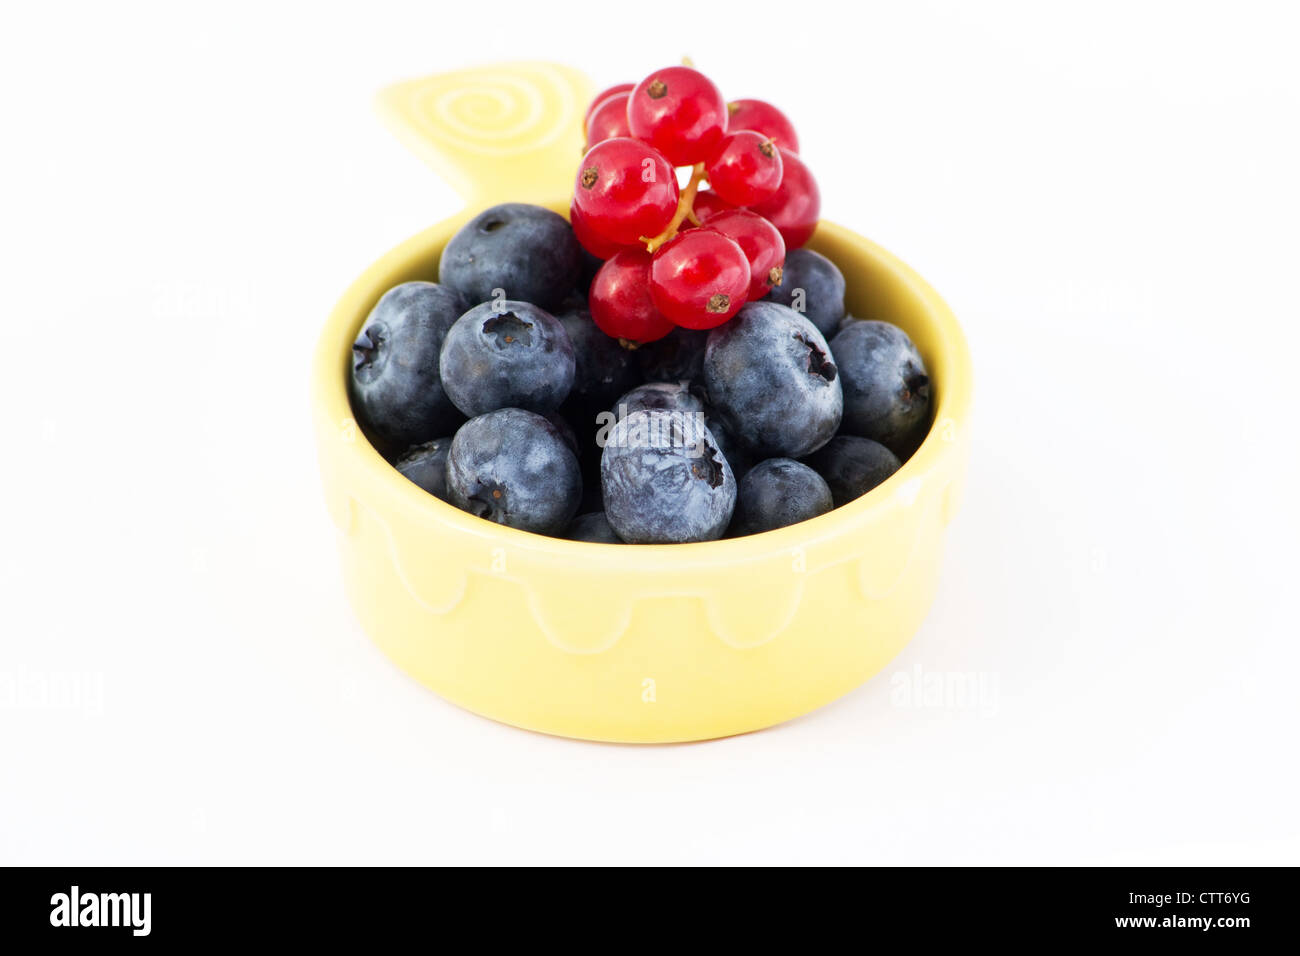 Blueberries and currants on white background Stock Photo